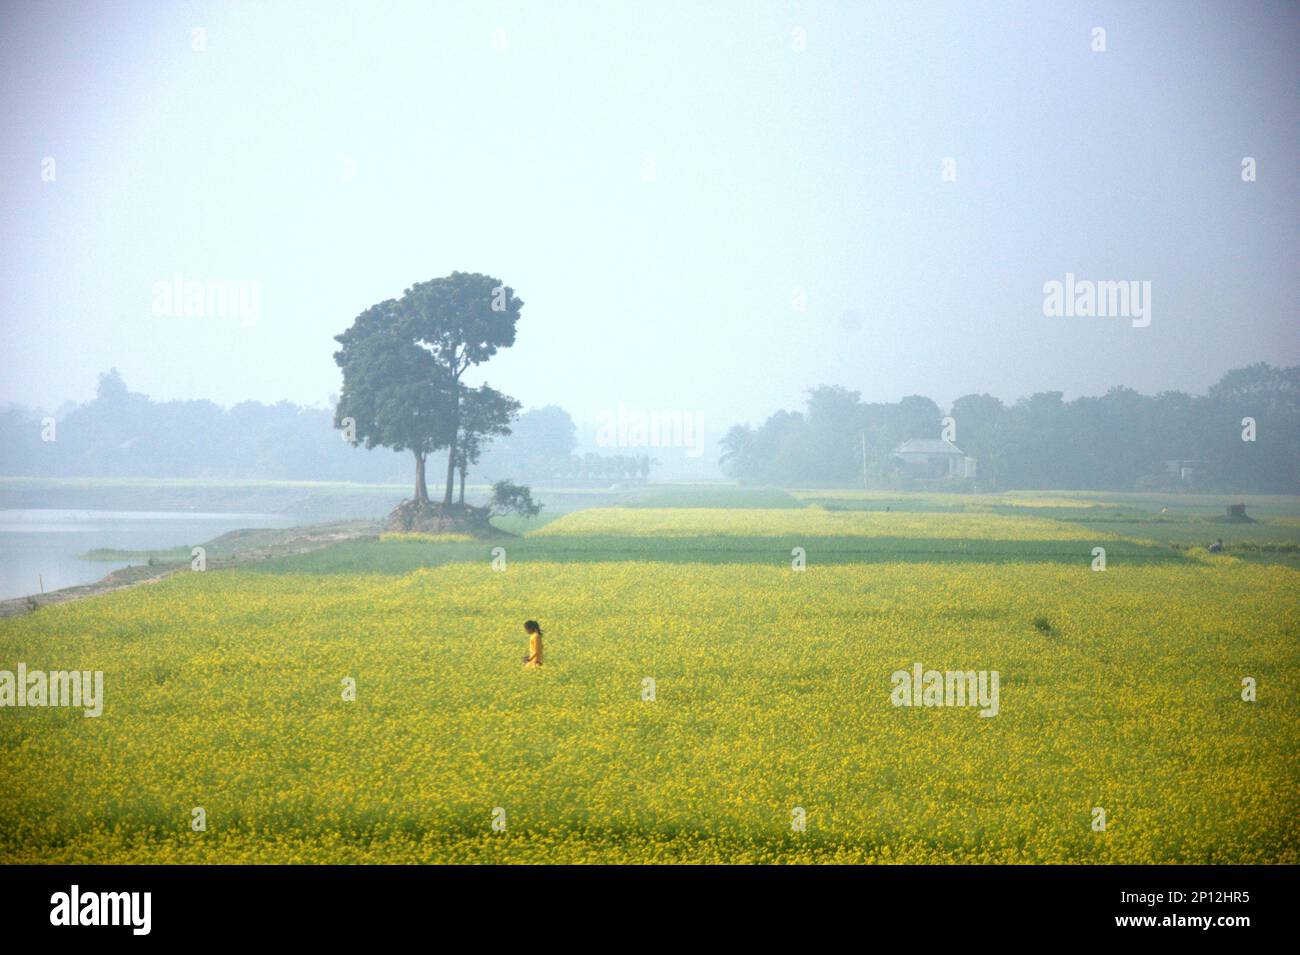 Winter morning picture in a rural side area with mustard field in Bangladesh. Stock Photo